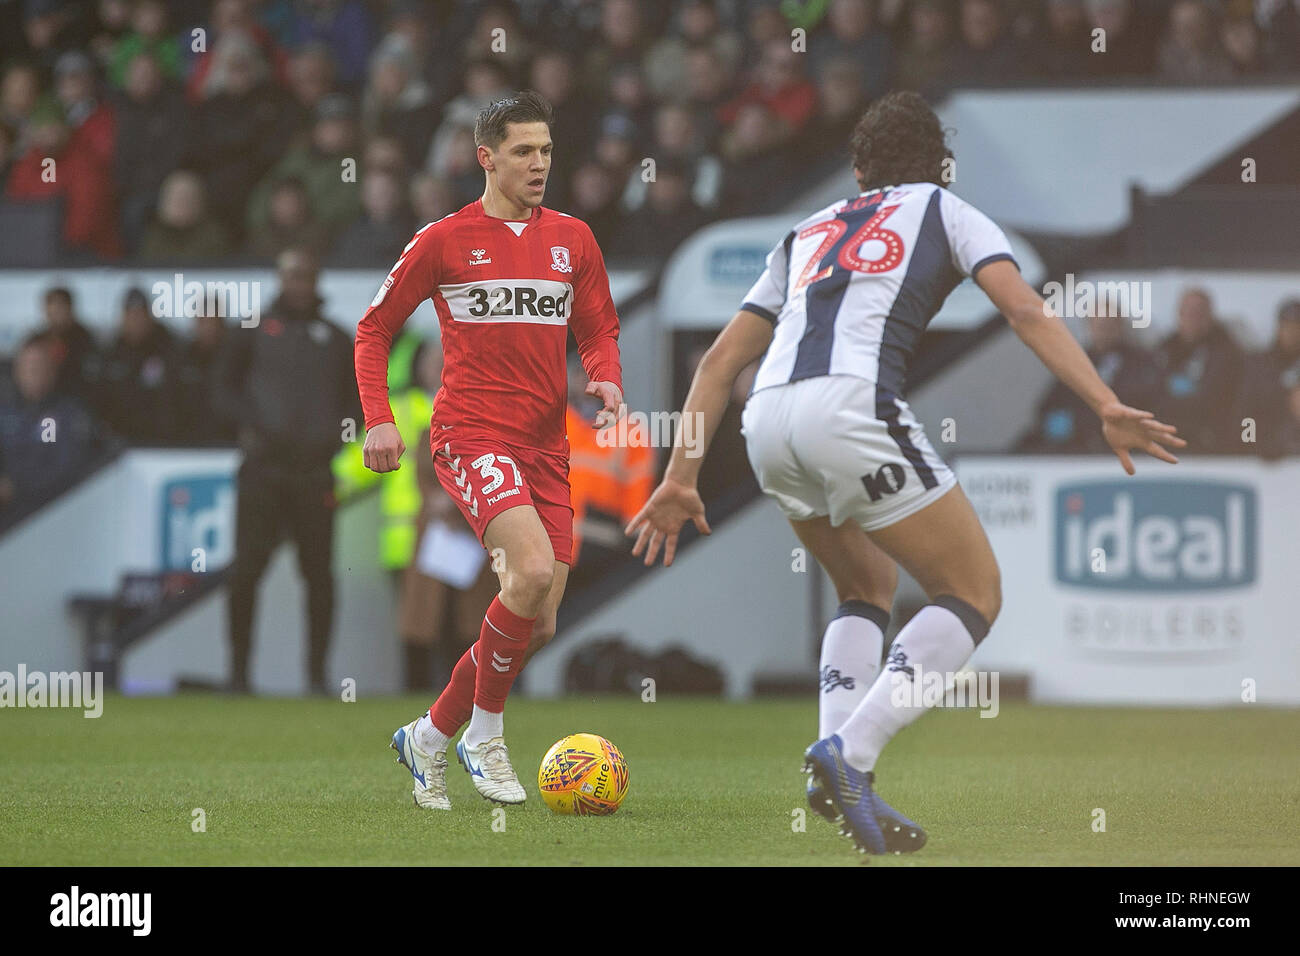 West Bromwich, UK. 2 February 2019.  Muhamed Bešic of Middlesbrough and Ahmed Hegazy of West Bromwich Albion during the Sky Bet Championship match between West Bromwich Albion and Middlesbrough at The Hawthorns, West Bromwich on Saturday 2nd February 2019.  (MI News | Alamy) Credit: MI News & Sport /Alamy Live News Stock Photo